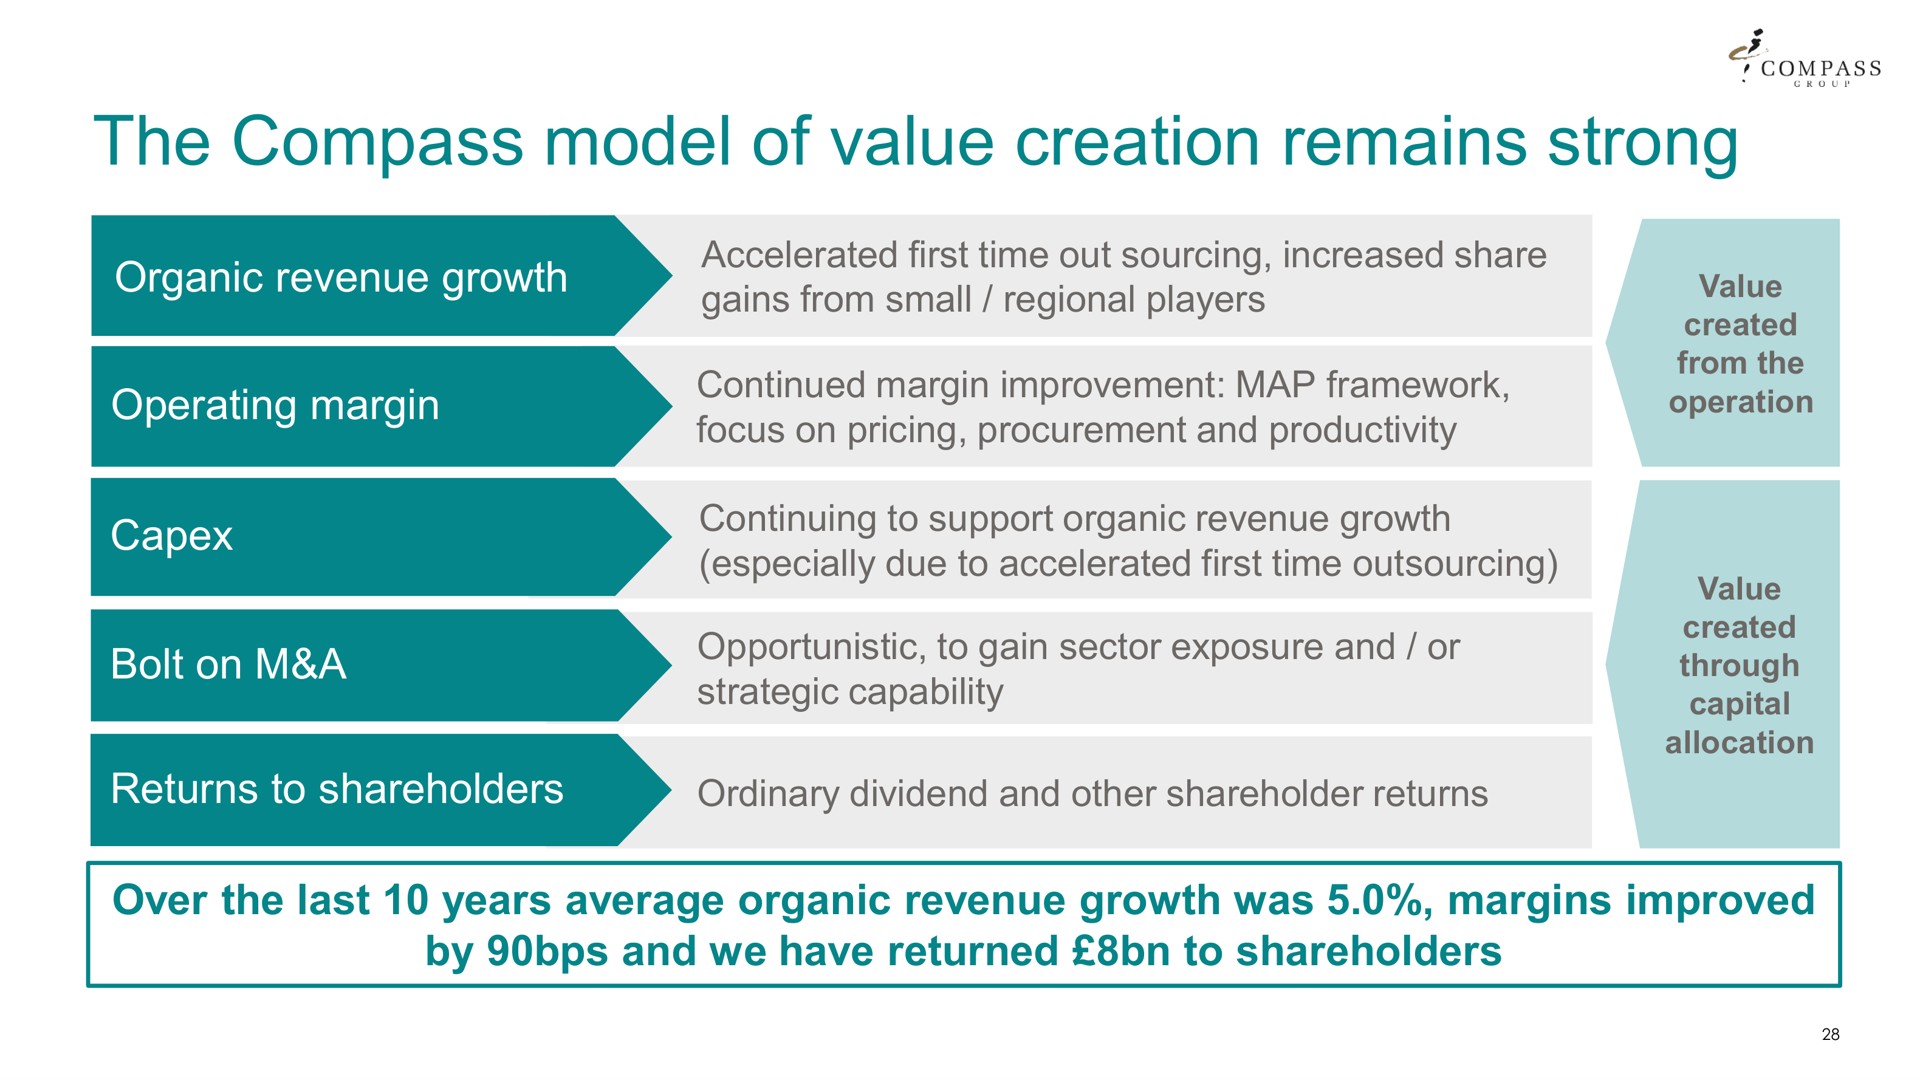 the compass model of value creation remains strong | Compass Group